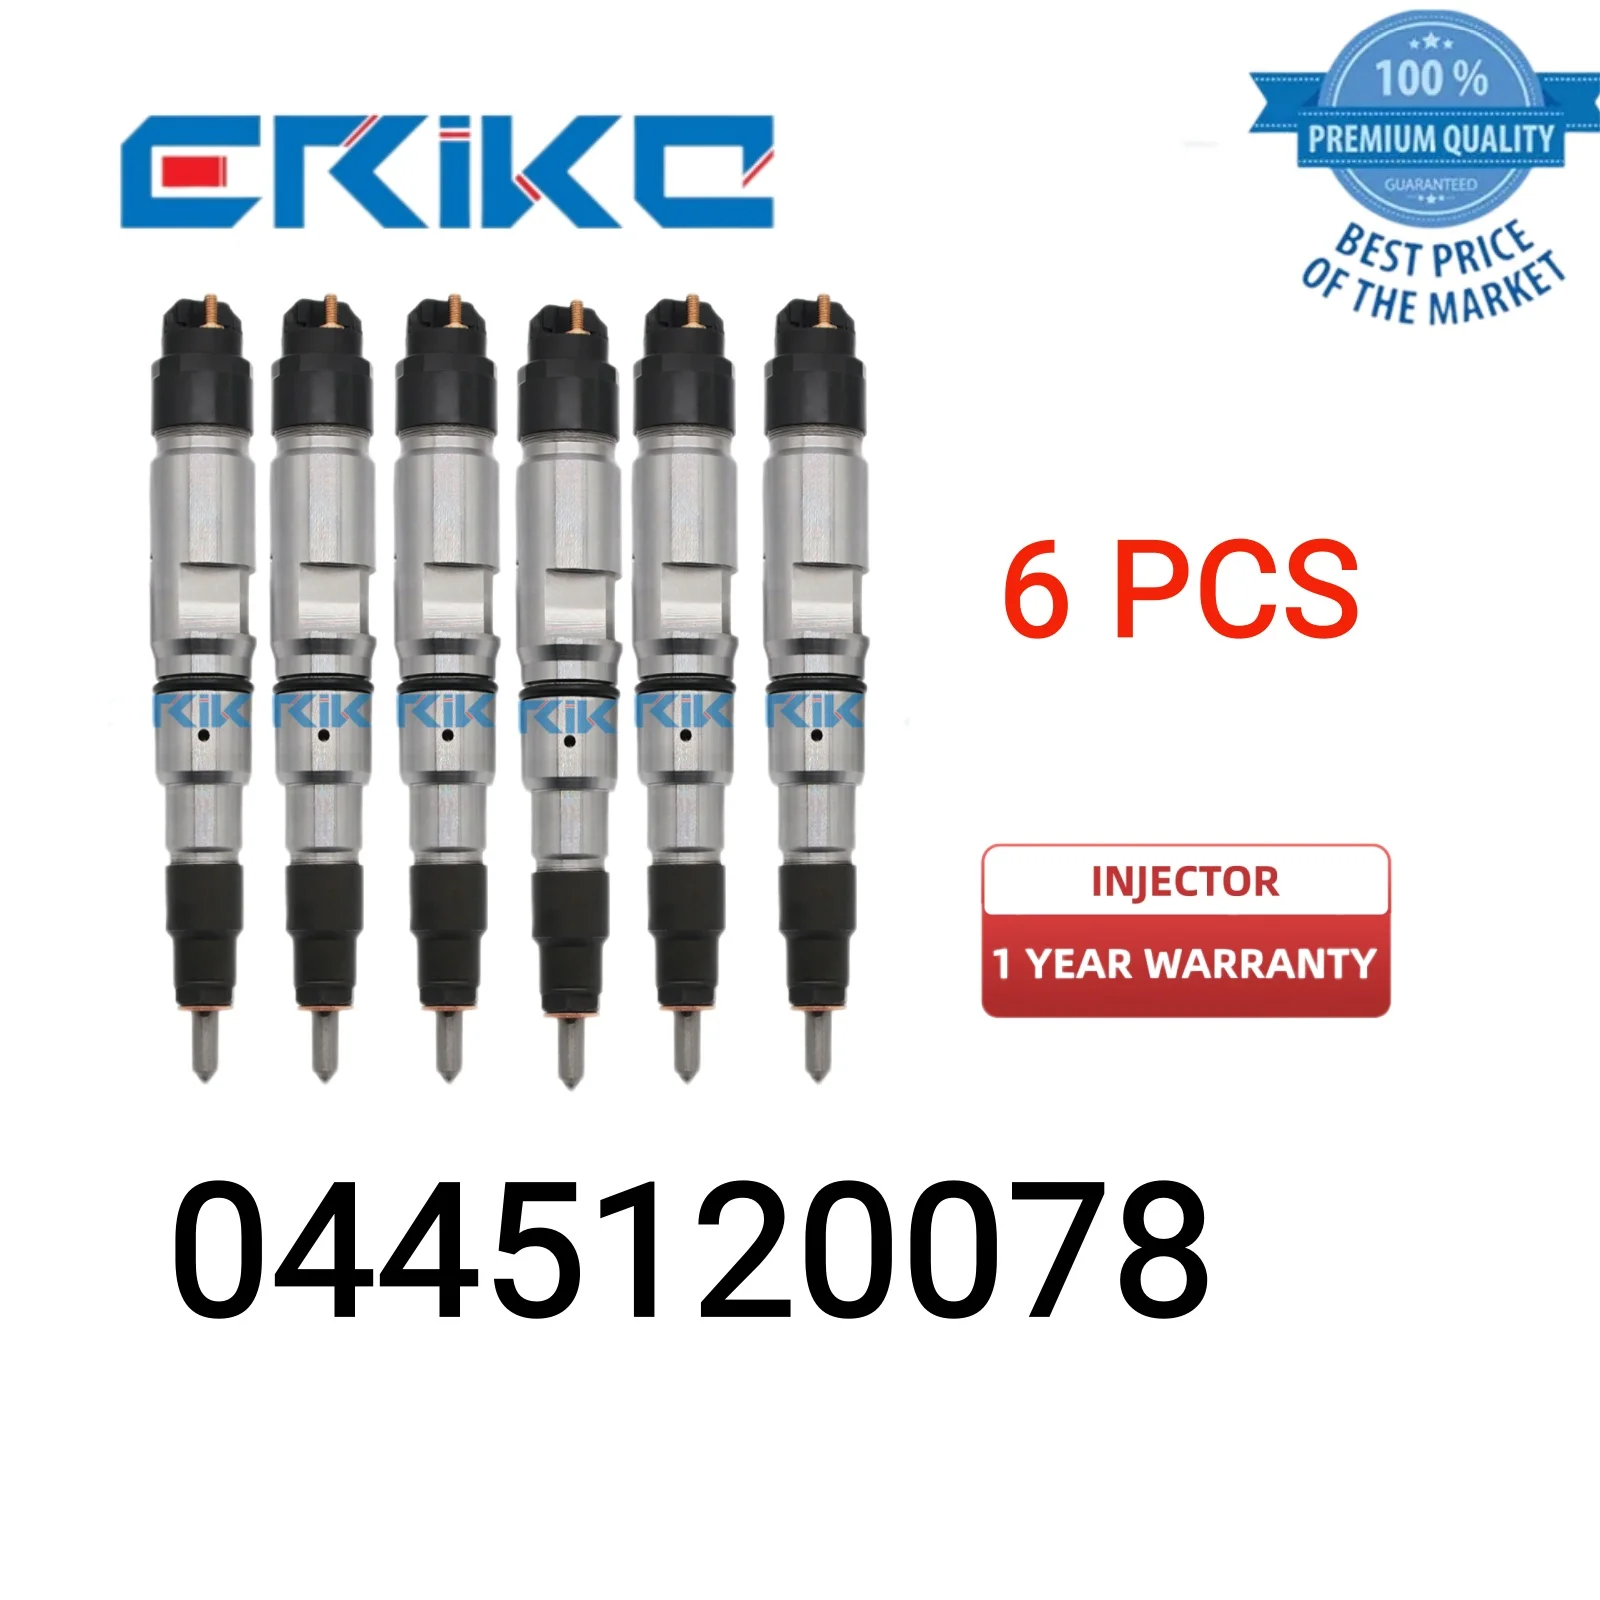 

6 PCS 0445120078 Diesel Part Injection 0 445 120 078 Auto Engine Injector 0445 120 078 car injector for Golden Dragon Wuxi Sida